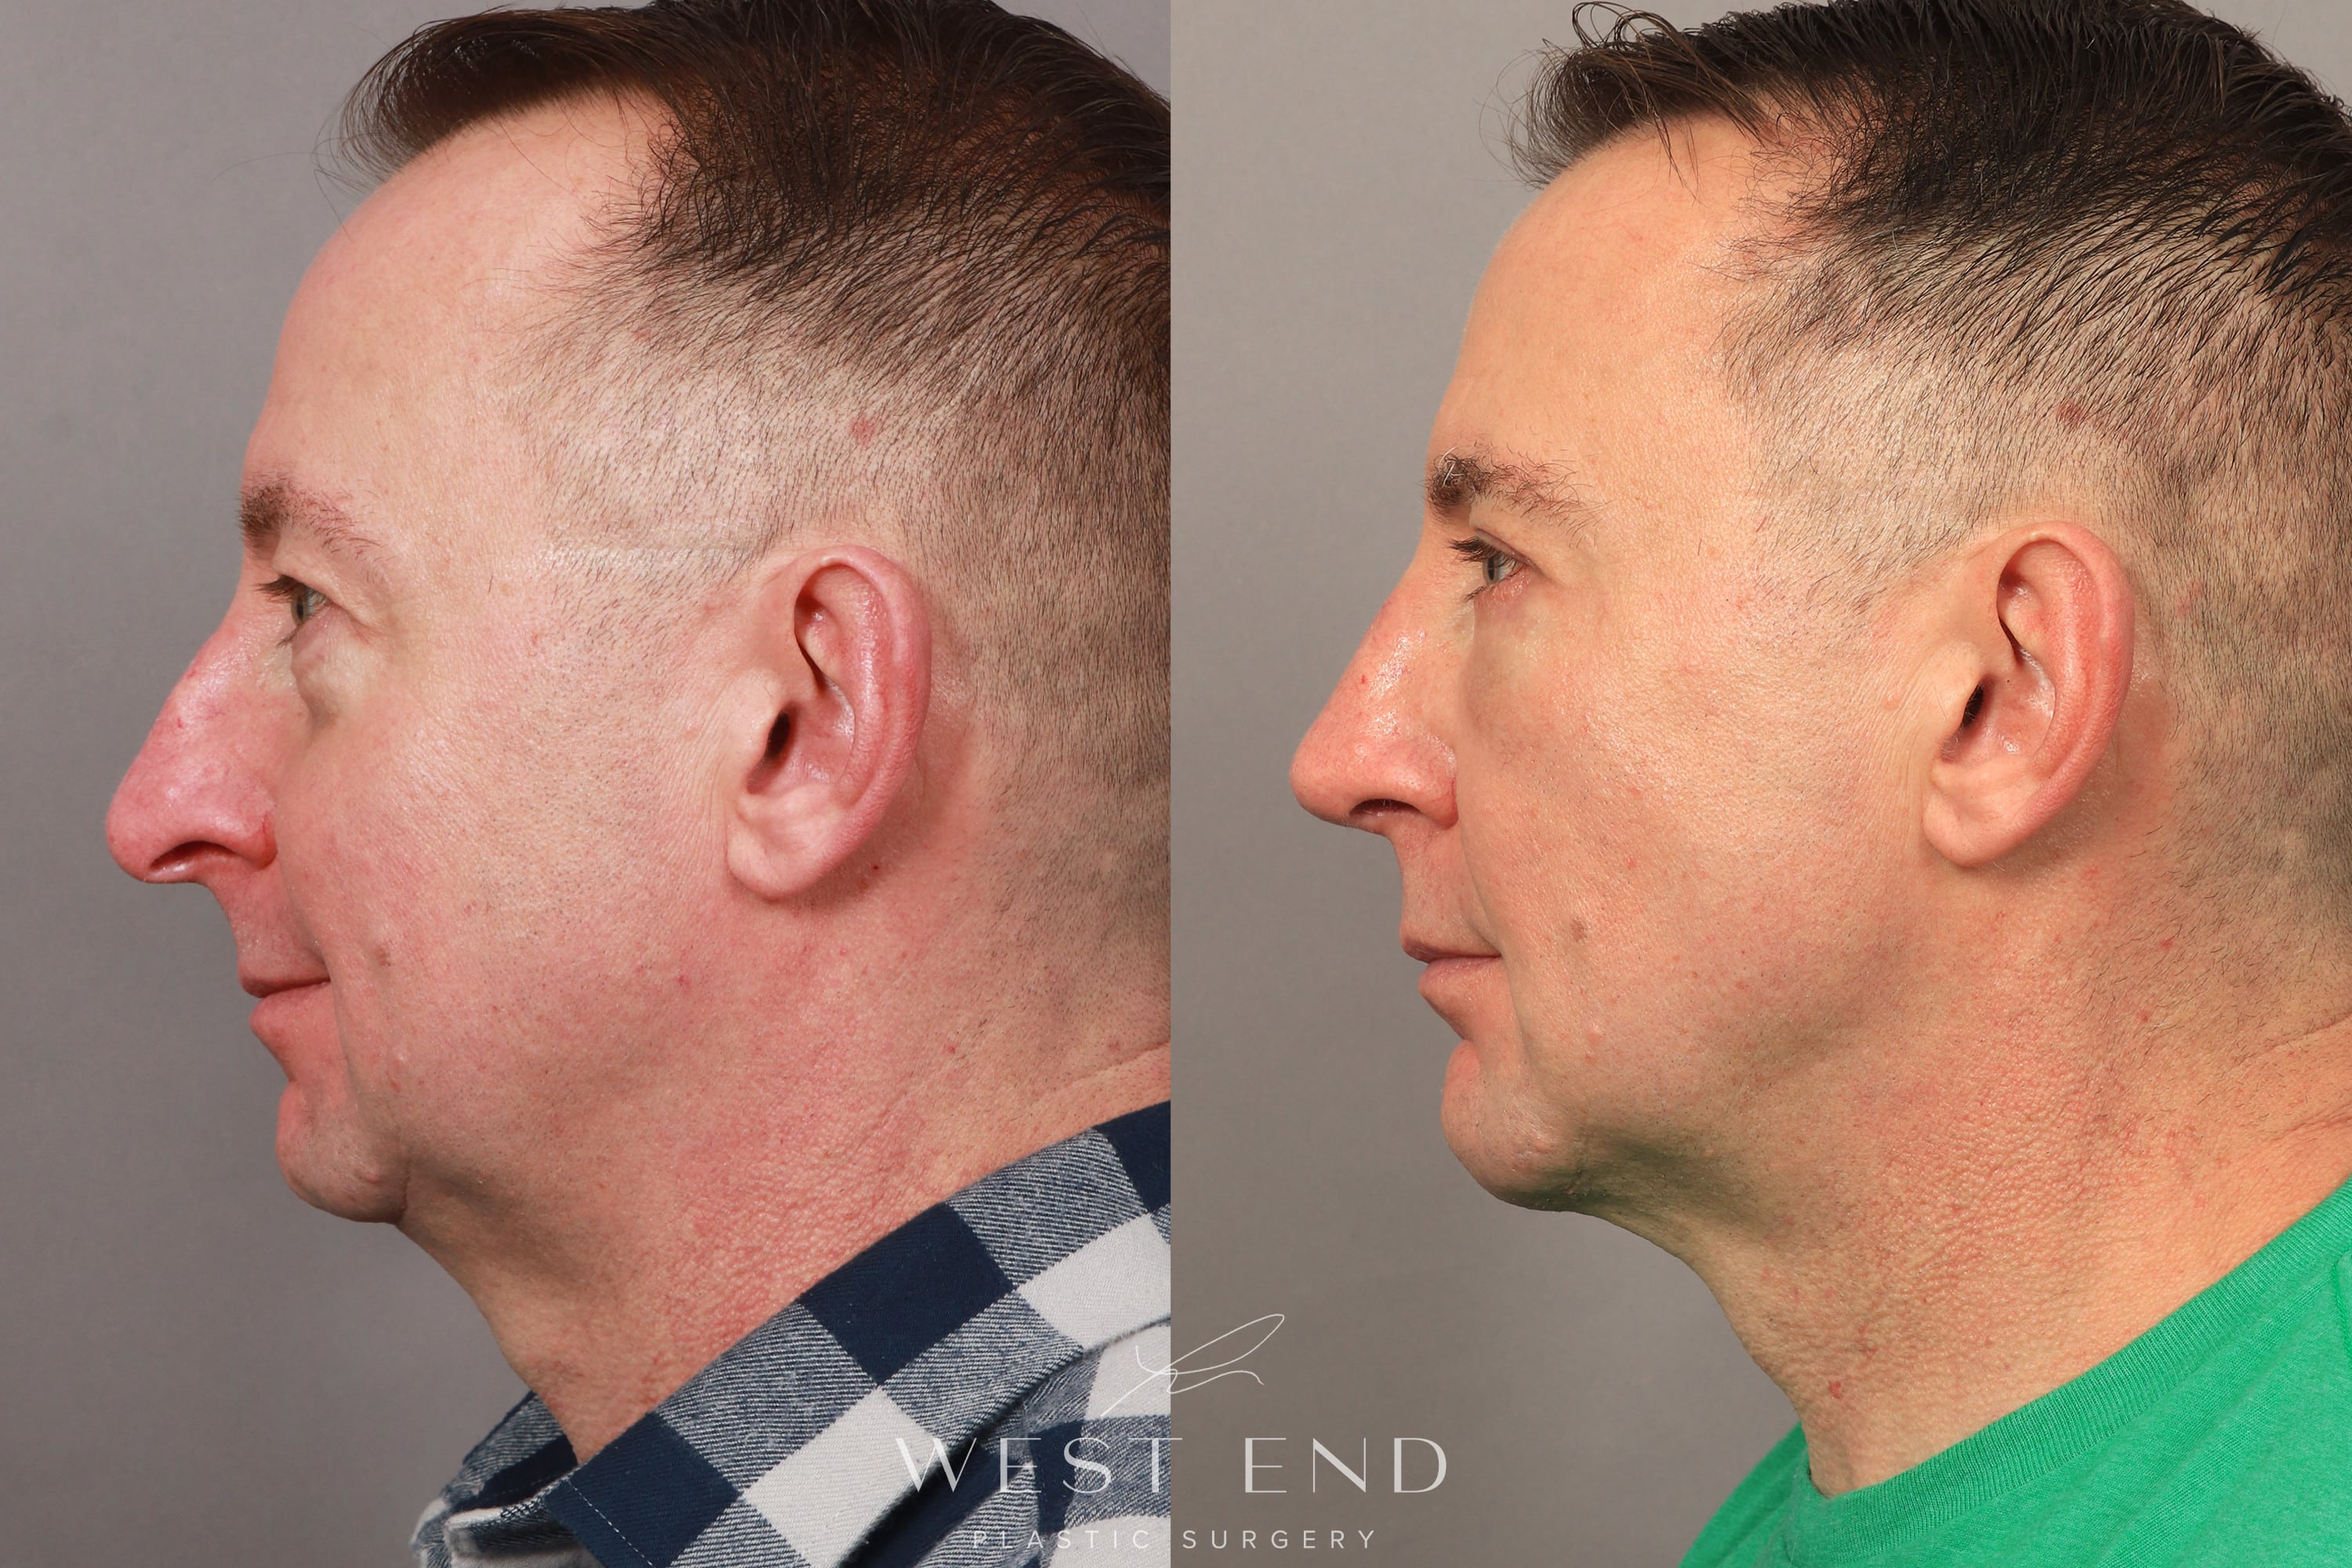 Blepharoplasty, Chin Implant, Rhinoplasty, Brow Lift, Fat Grafting, and CO2 Resurfacing (9 Months Post-op)